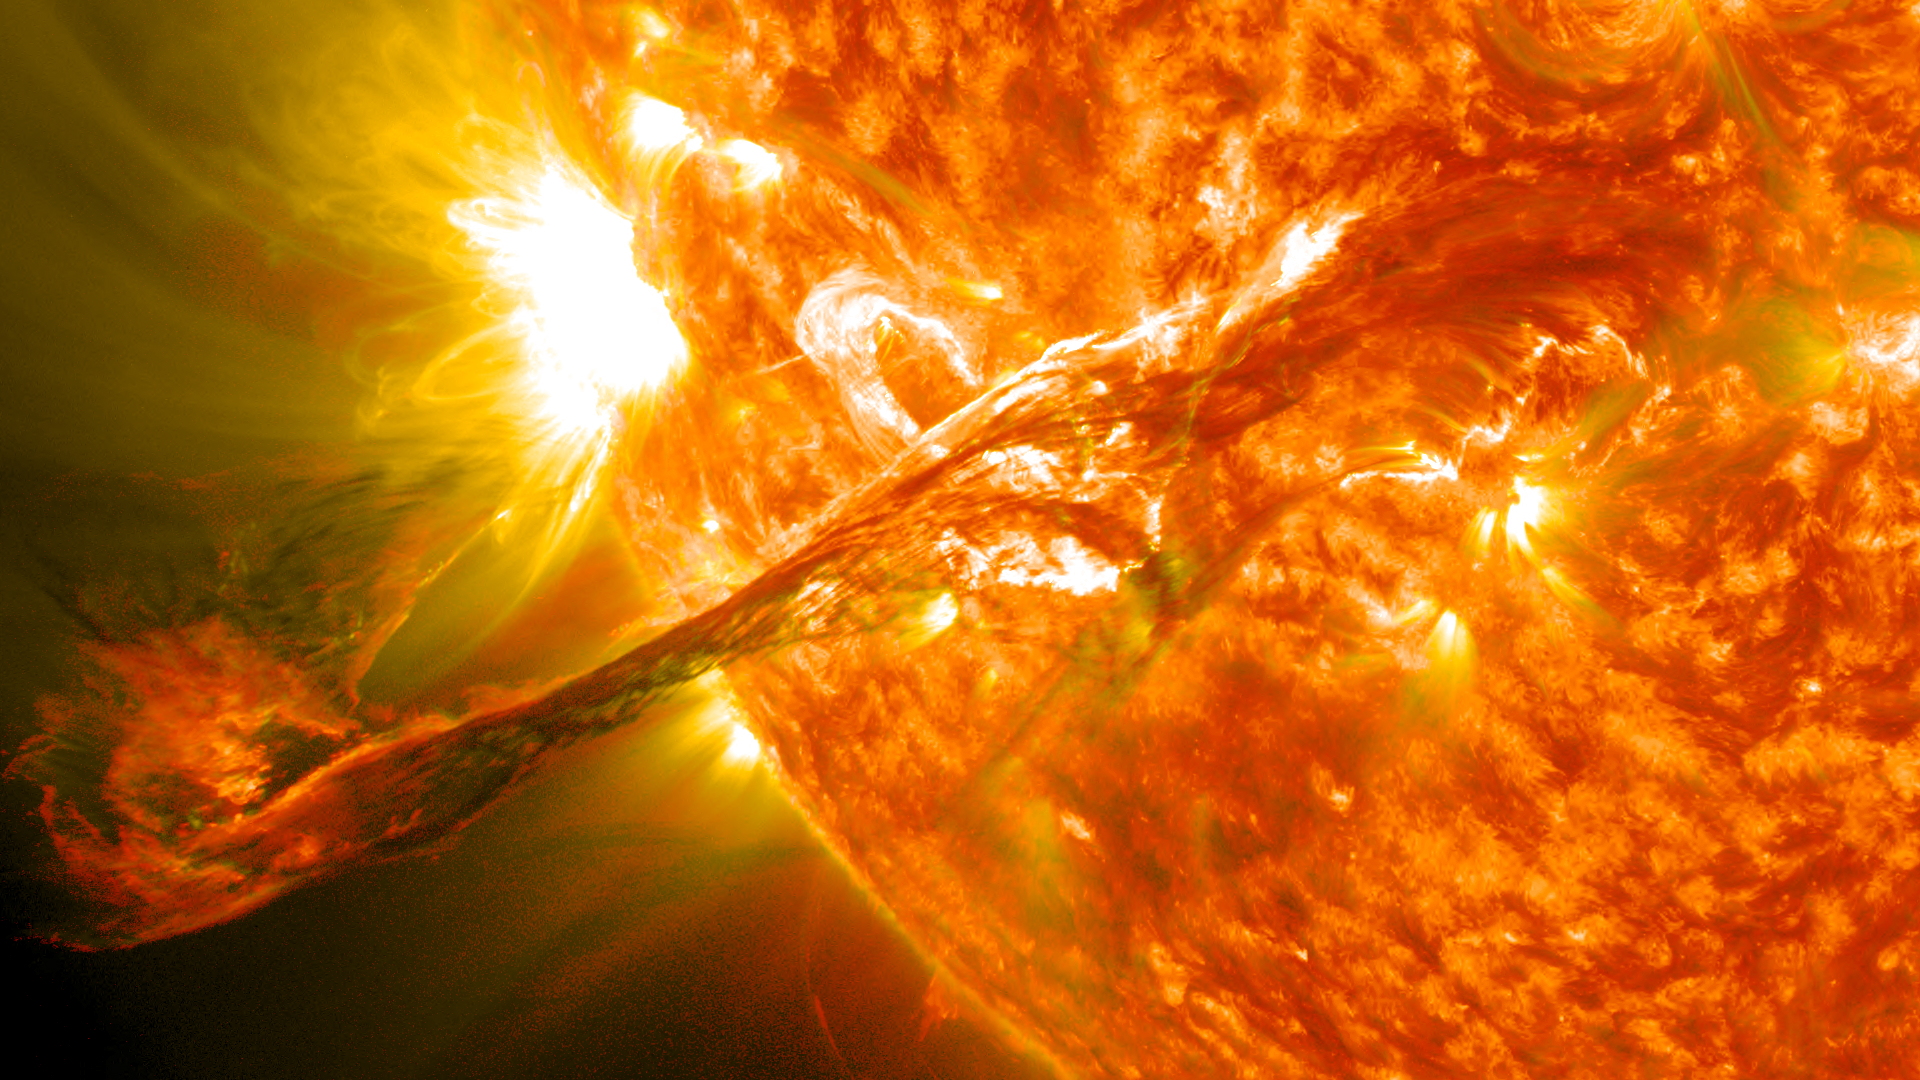 Black Out Expected Around The World As Solar Storm Hit Earth